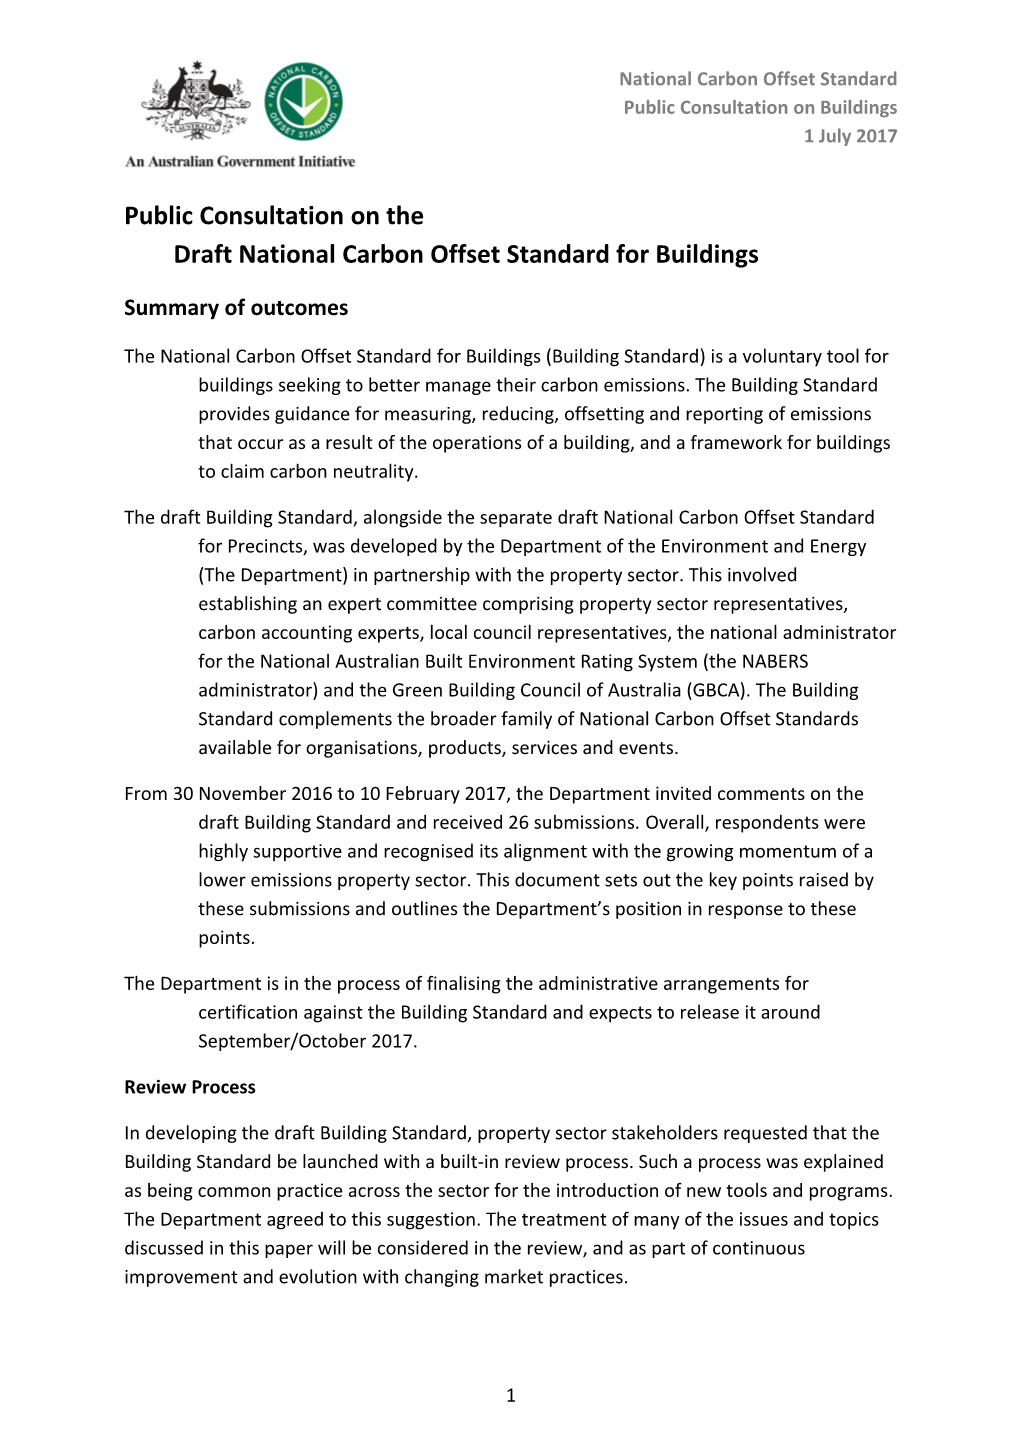 Public Consultation on the Draft National Carbon Offset Standard for Buildings - Summary